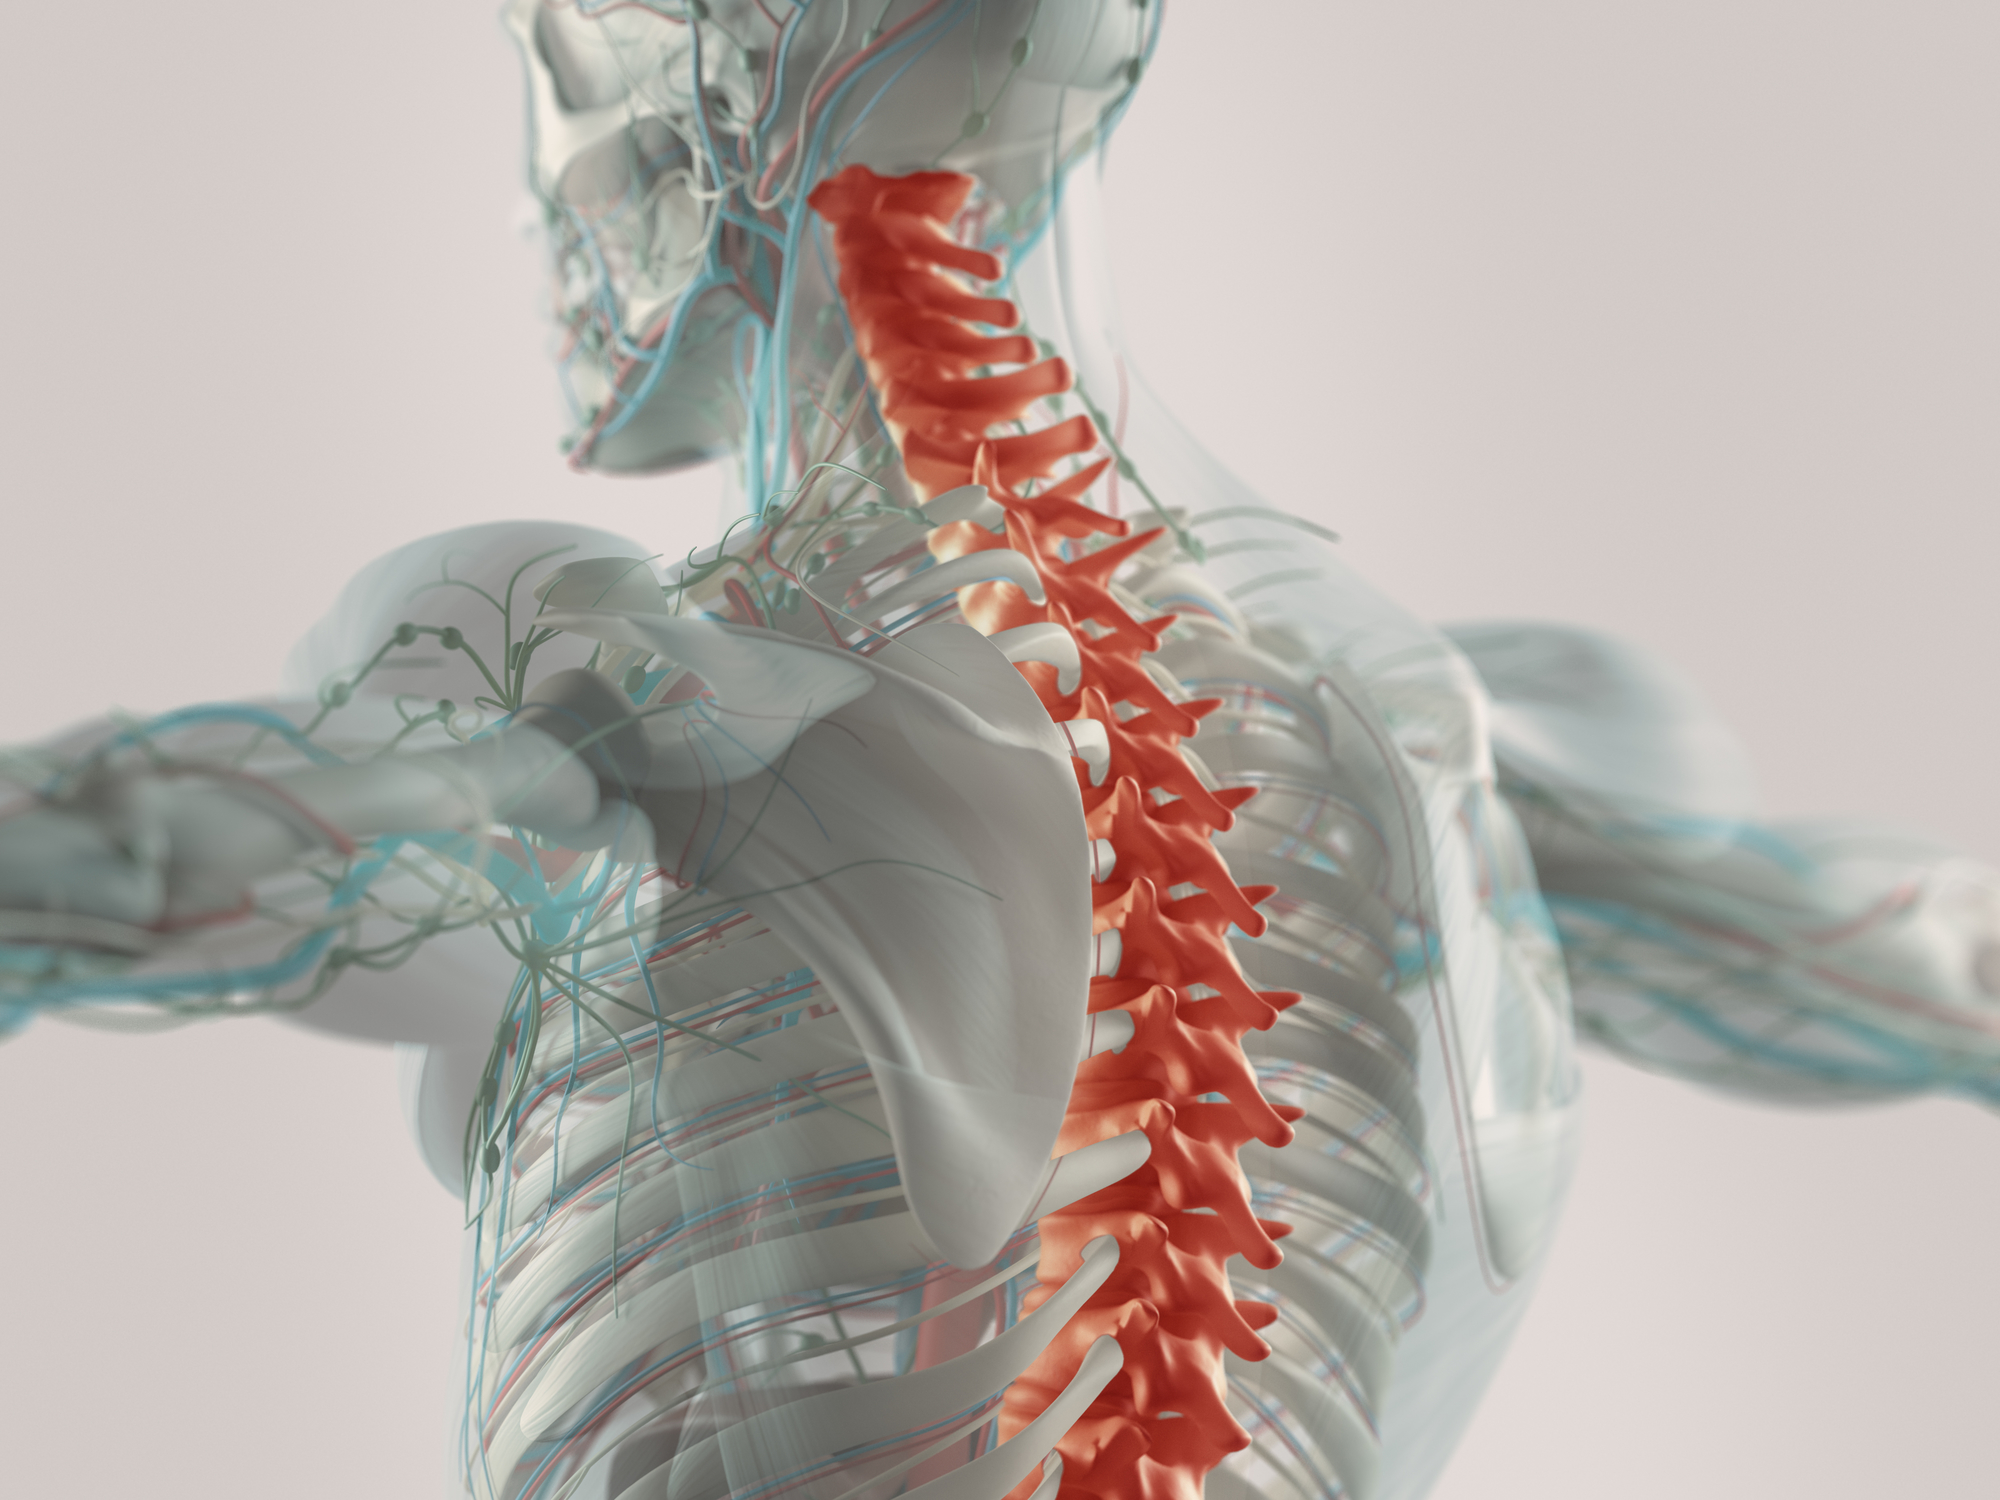 3D Chronic Back Pain Image | Miller Orthopedic Specialists | Specializing in a wide range of orthopedic services enables Miller Orthopedic Specialists to provide personalized care plans that get patients back to optimum health.